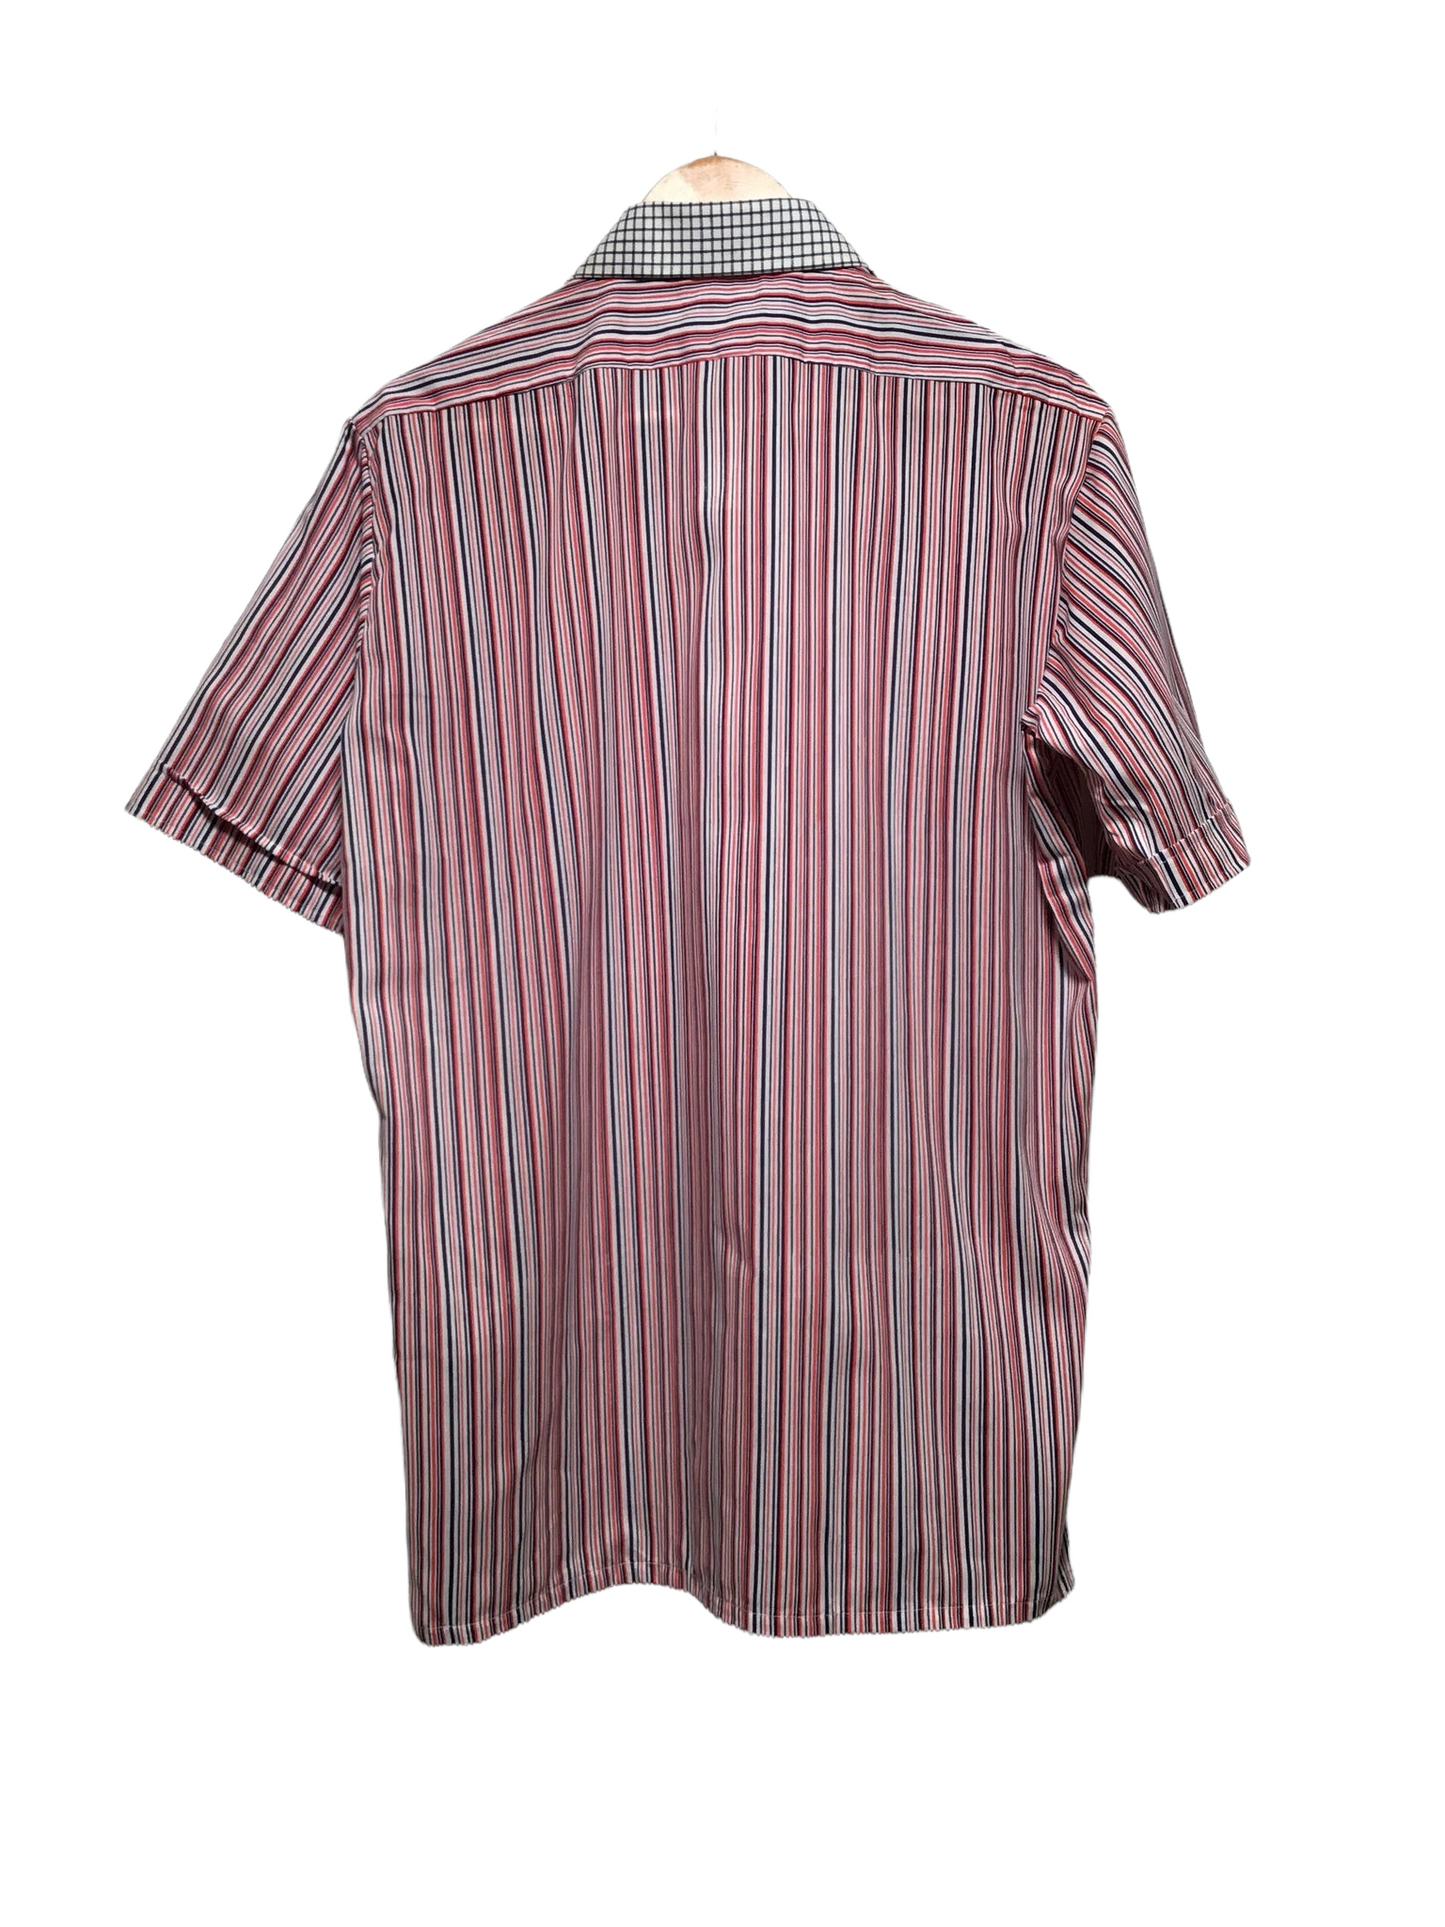 Check and Striped Shirt (Size L)